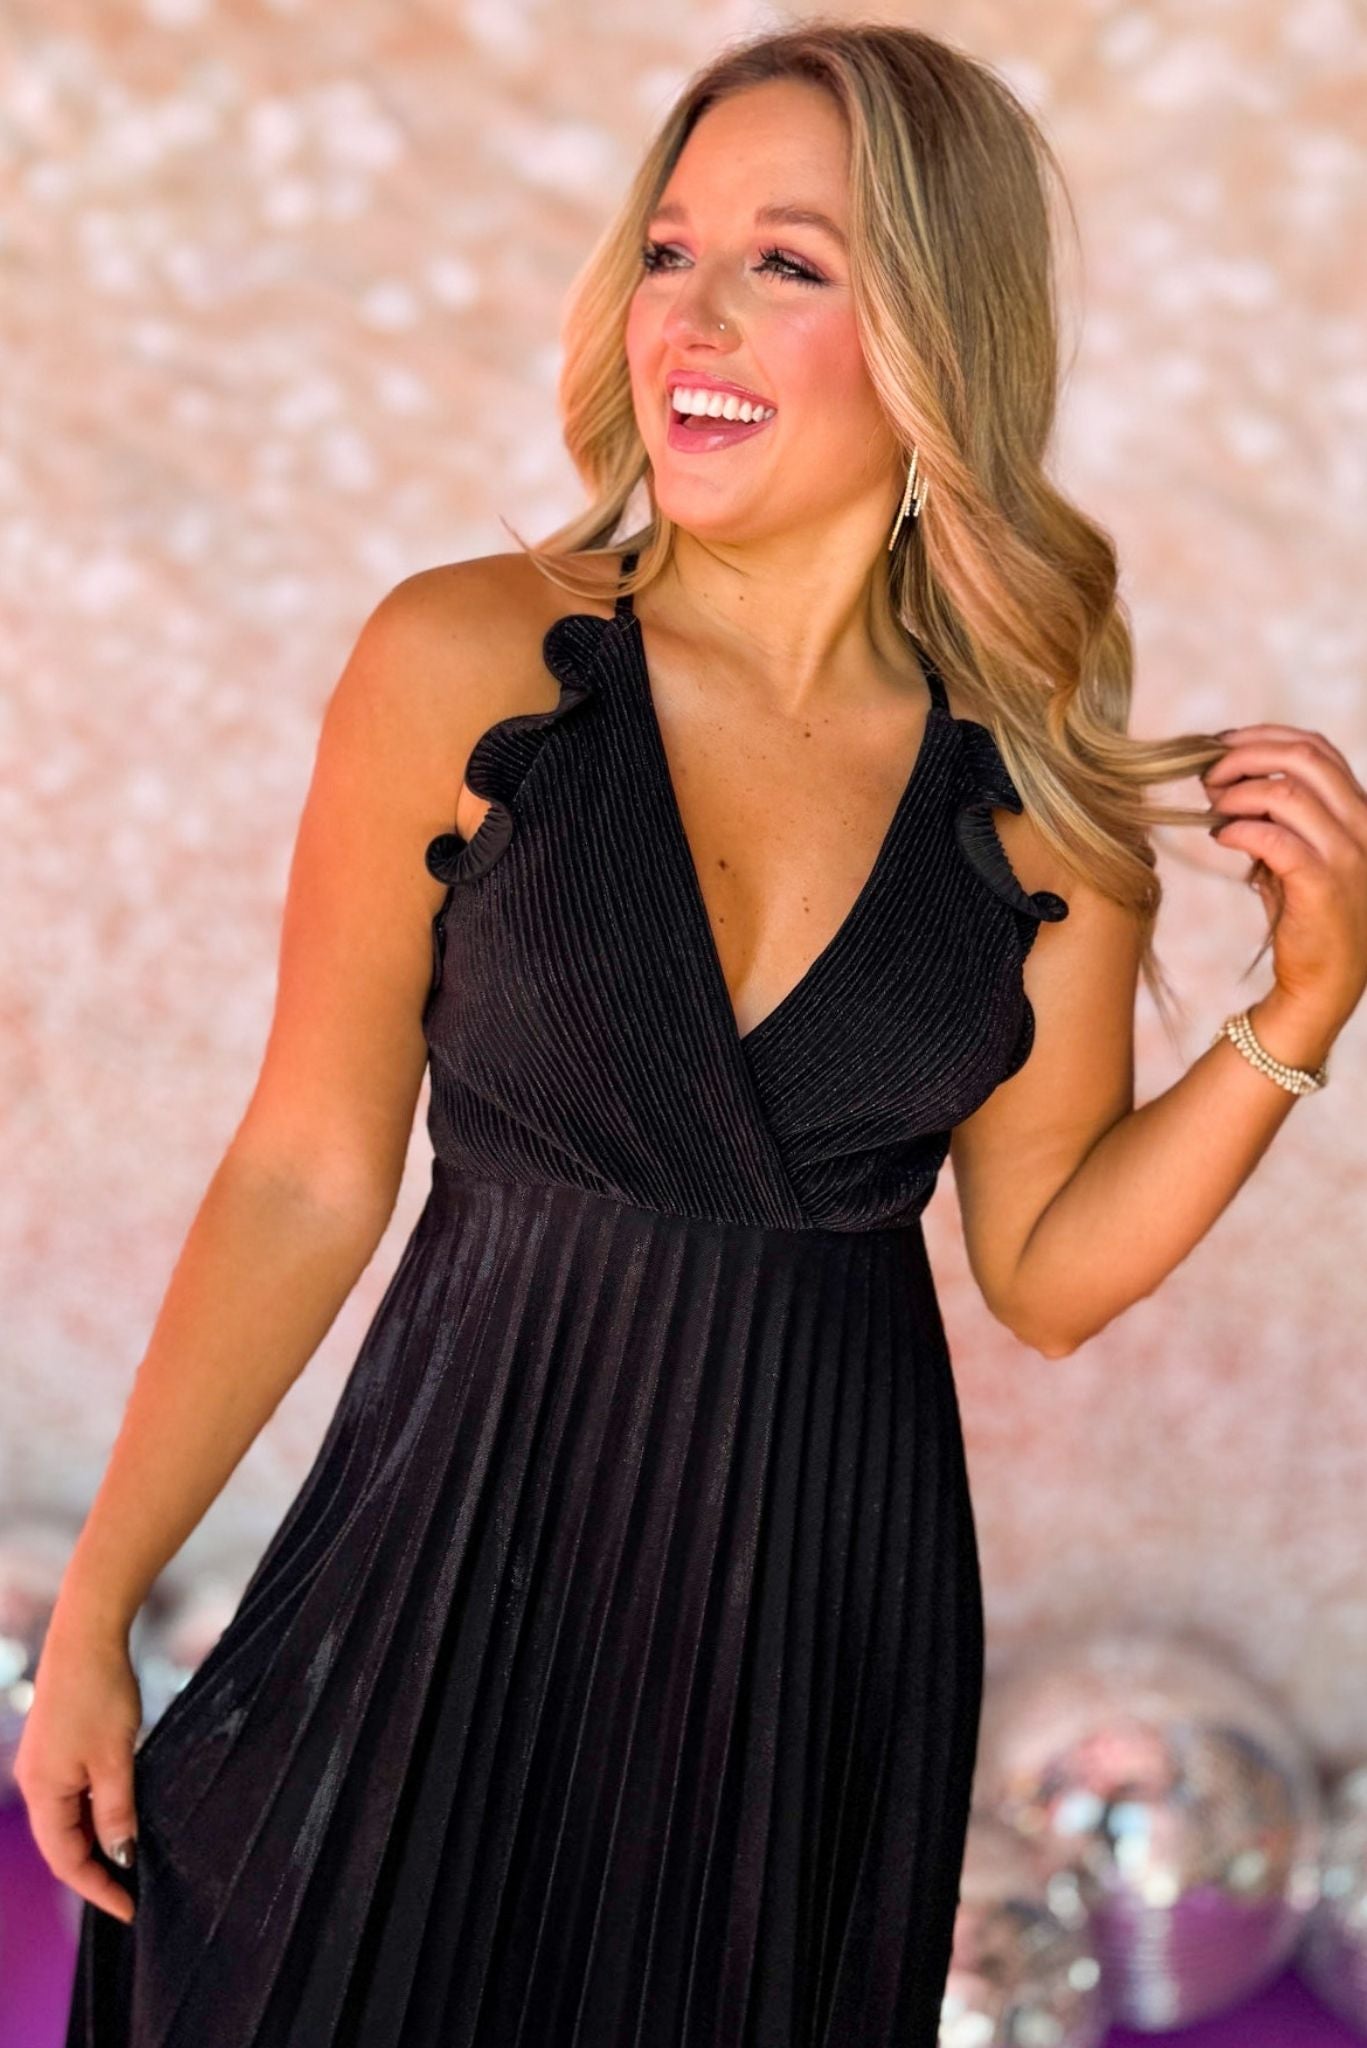 Black Metallic Pleated Maxi Dress, v neck, ruffle detail, open back, nye outfit, glam, must have, shop style your senses by mallory fitzsimmons